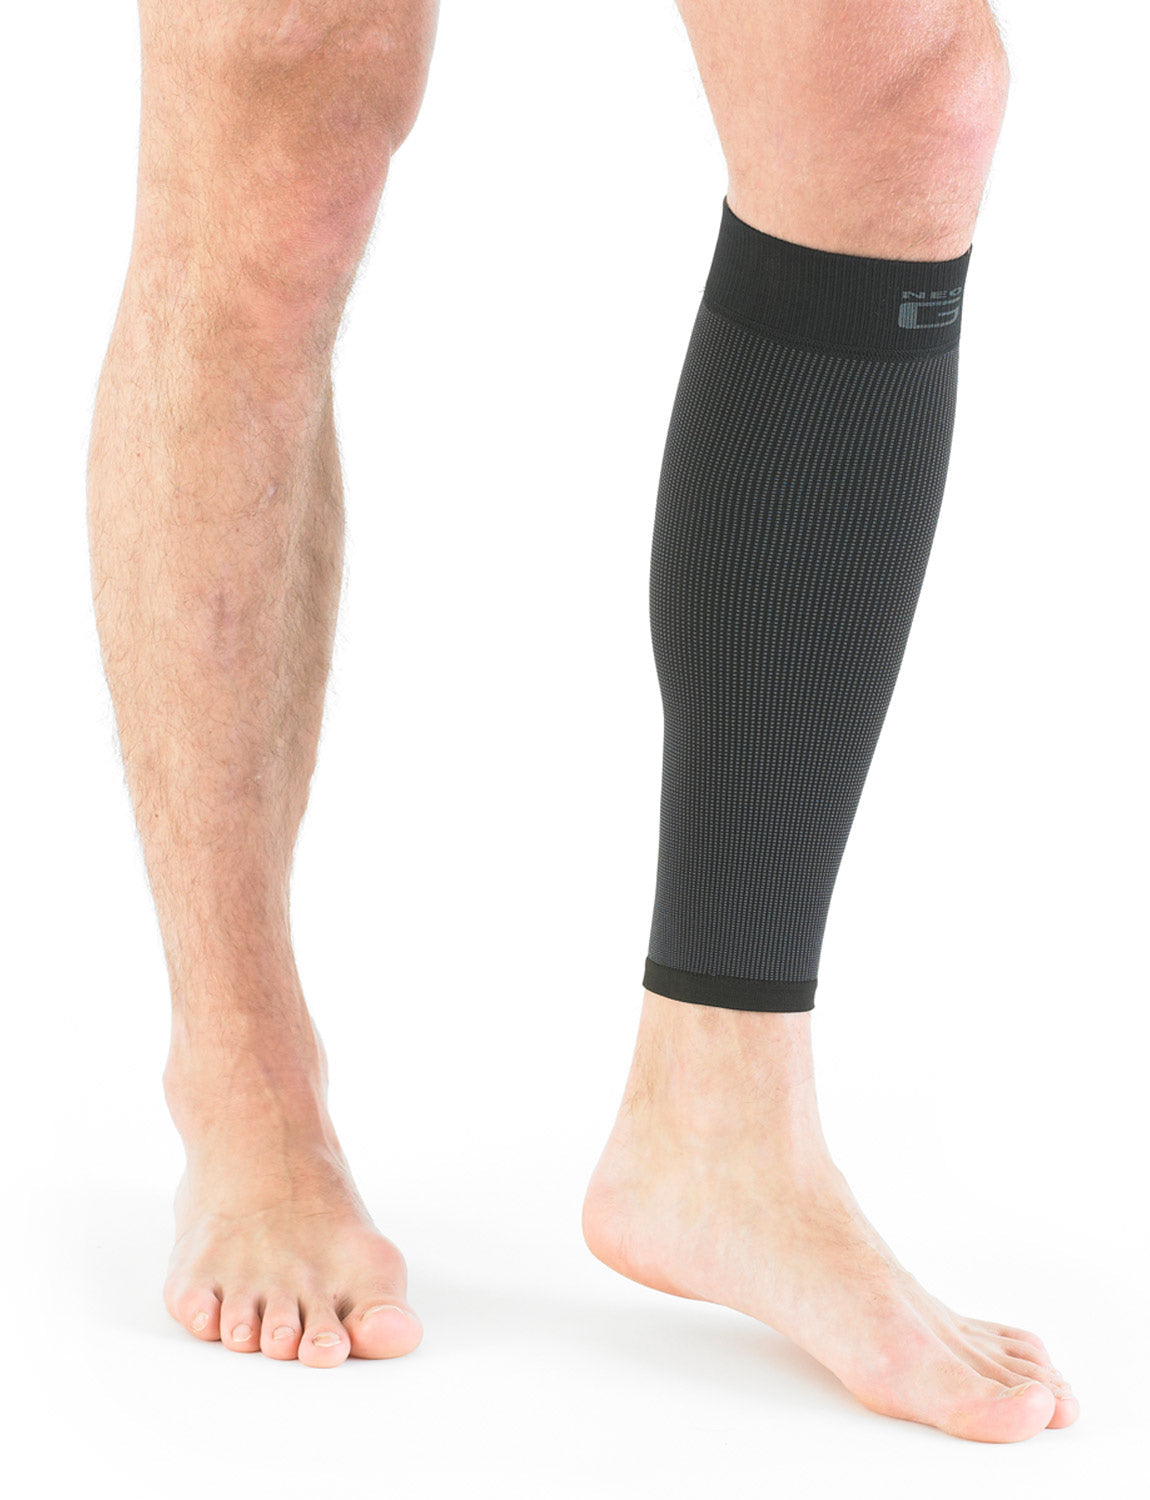 Calf Support Compression Sleeves for Shin Splints (20-30 mmHg / Class 2)  (Pair)